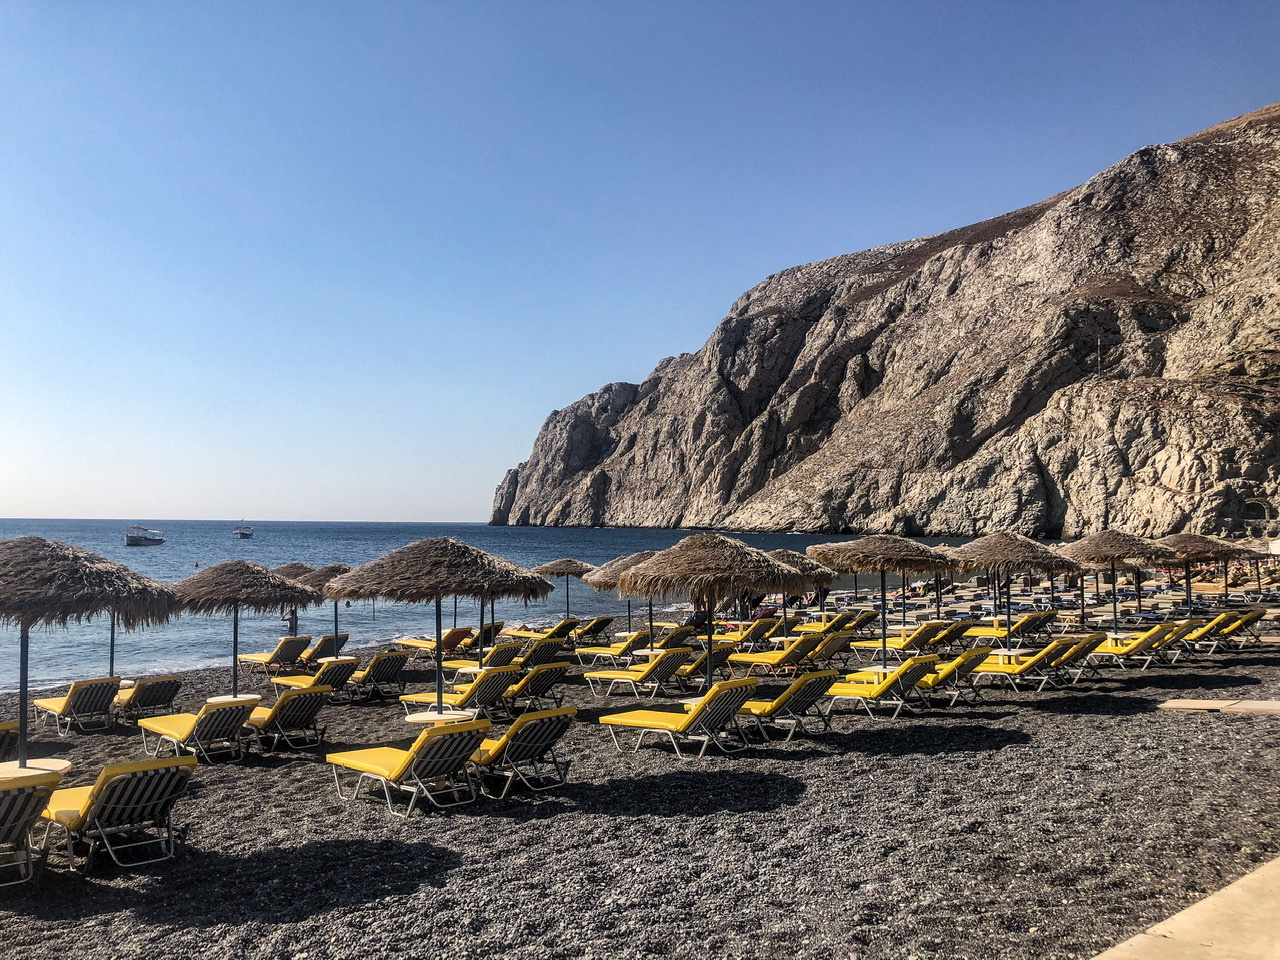 Volcanic black stoney beach covered in yellow sunloungers with woven sun umbrellas, two small boats in ocean and rocky cliffs to right